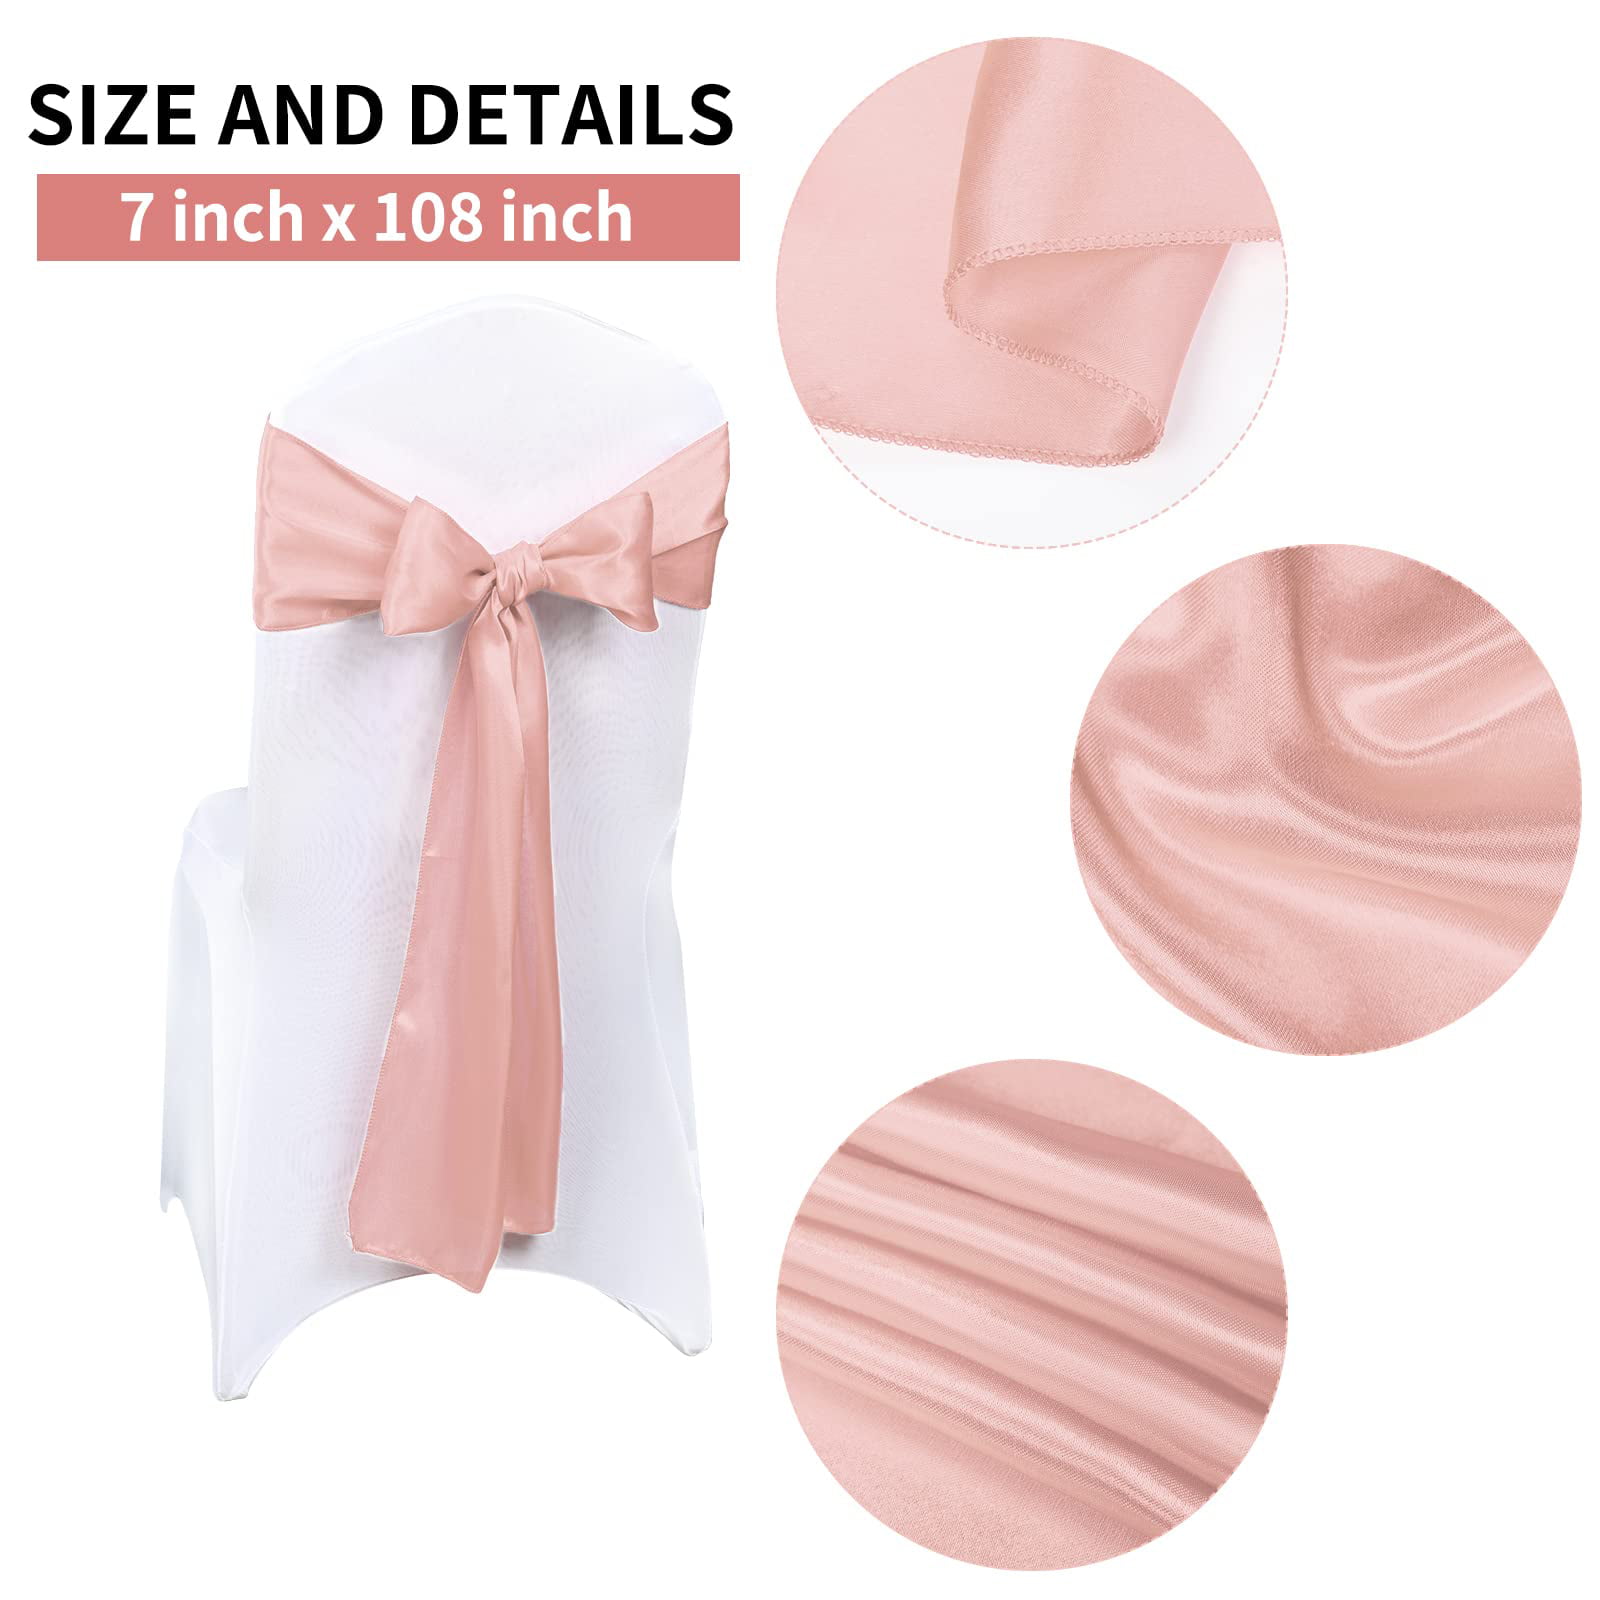 50 PCS Satin Chair Sash Chair Decorative Bow Designed Chair Cover Chair  Sashes for Thanksgiving Wedding Christmas Banquet Party (Rose Gold, 7 x 108  inch) 